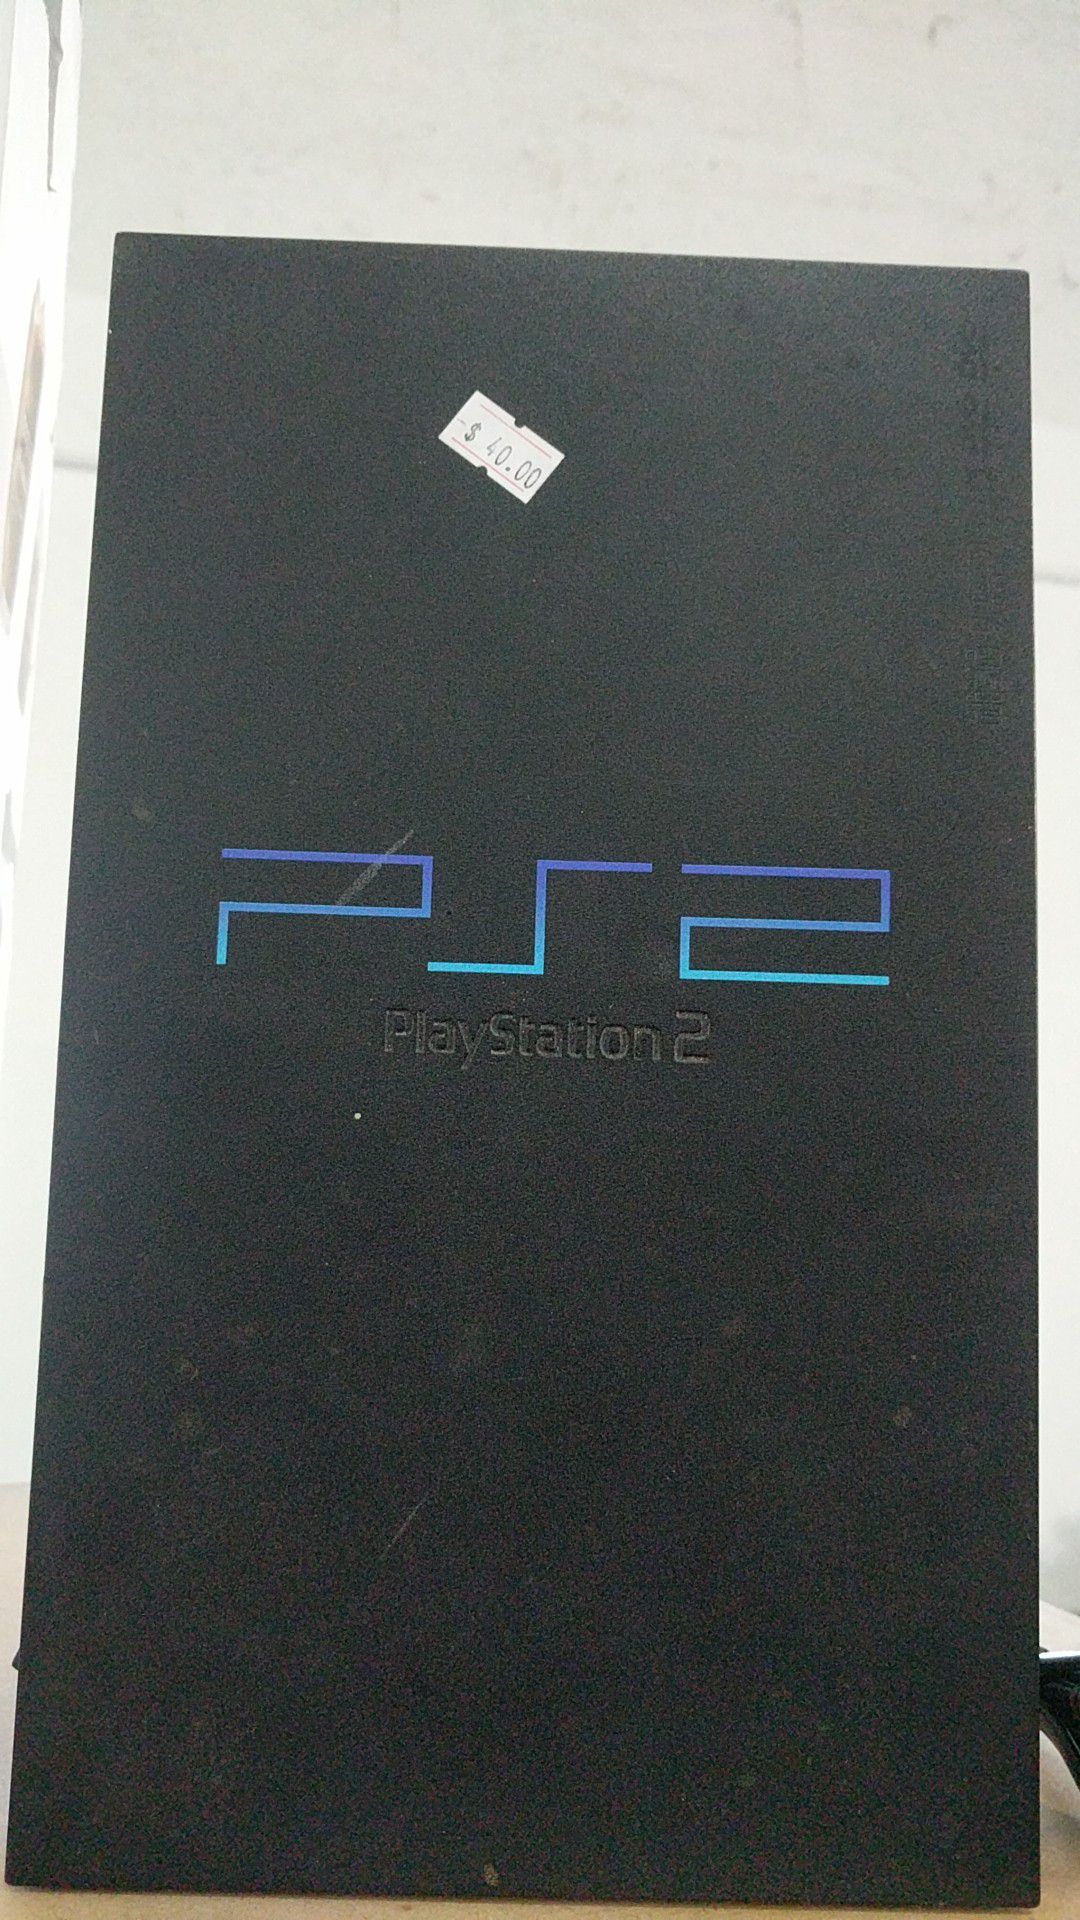 Ps2 game player